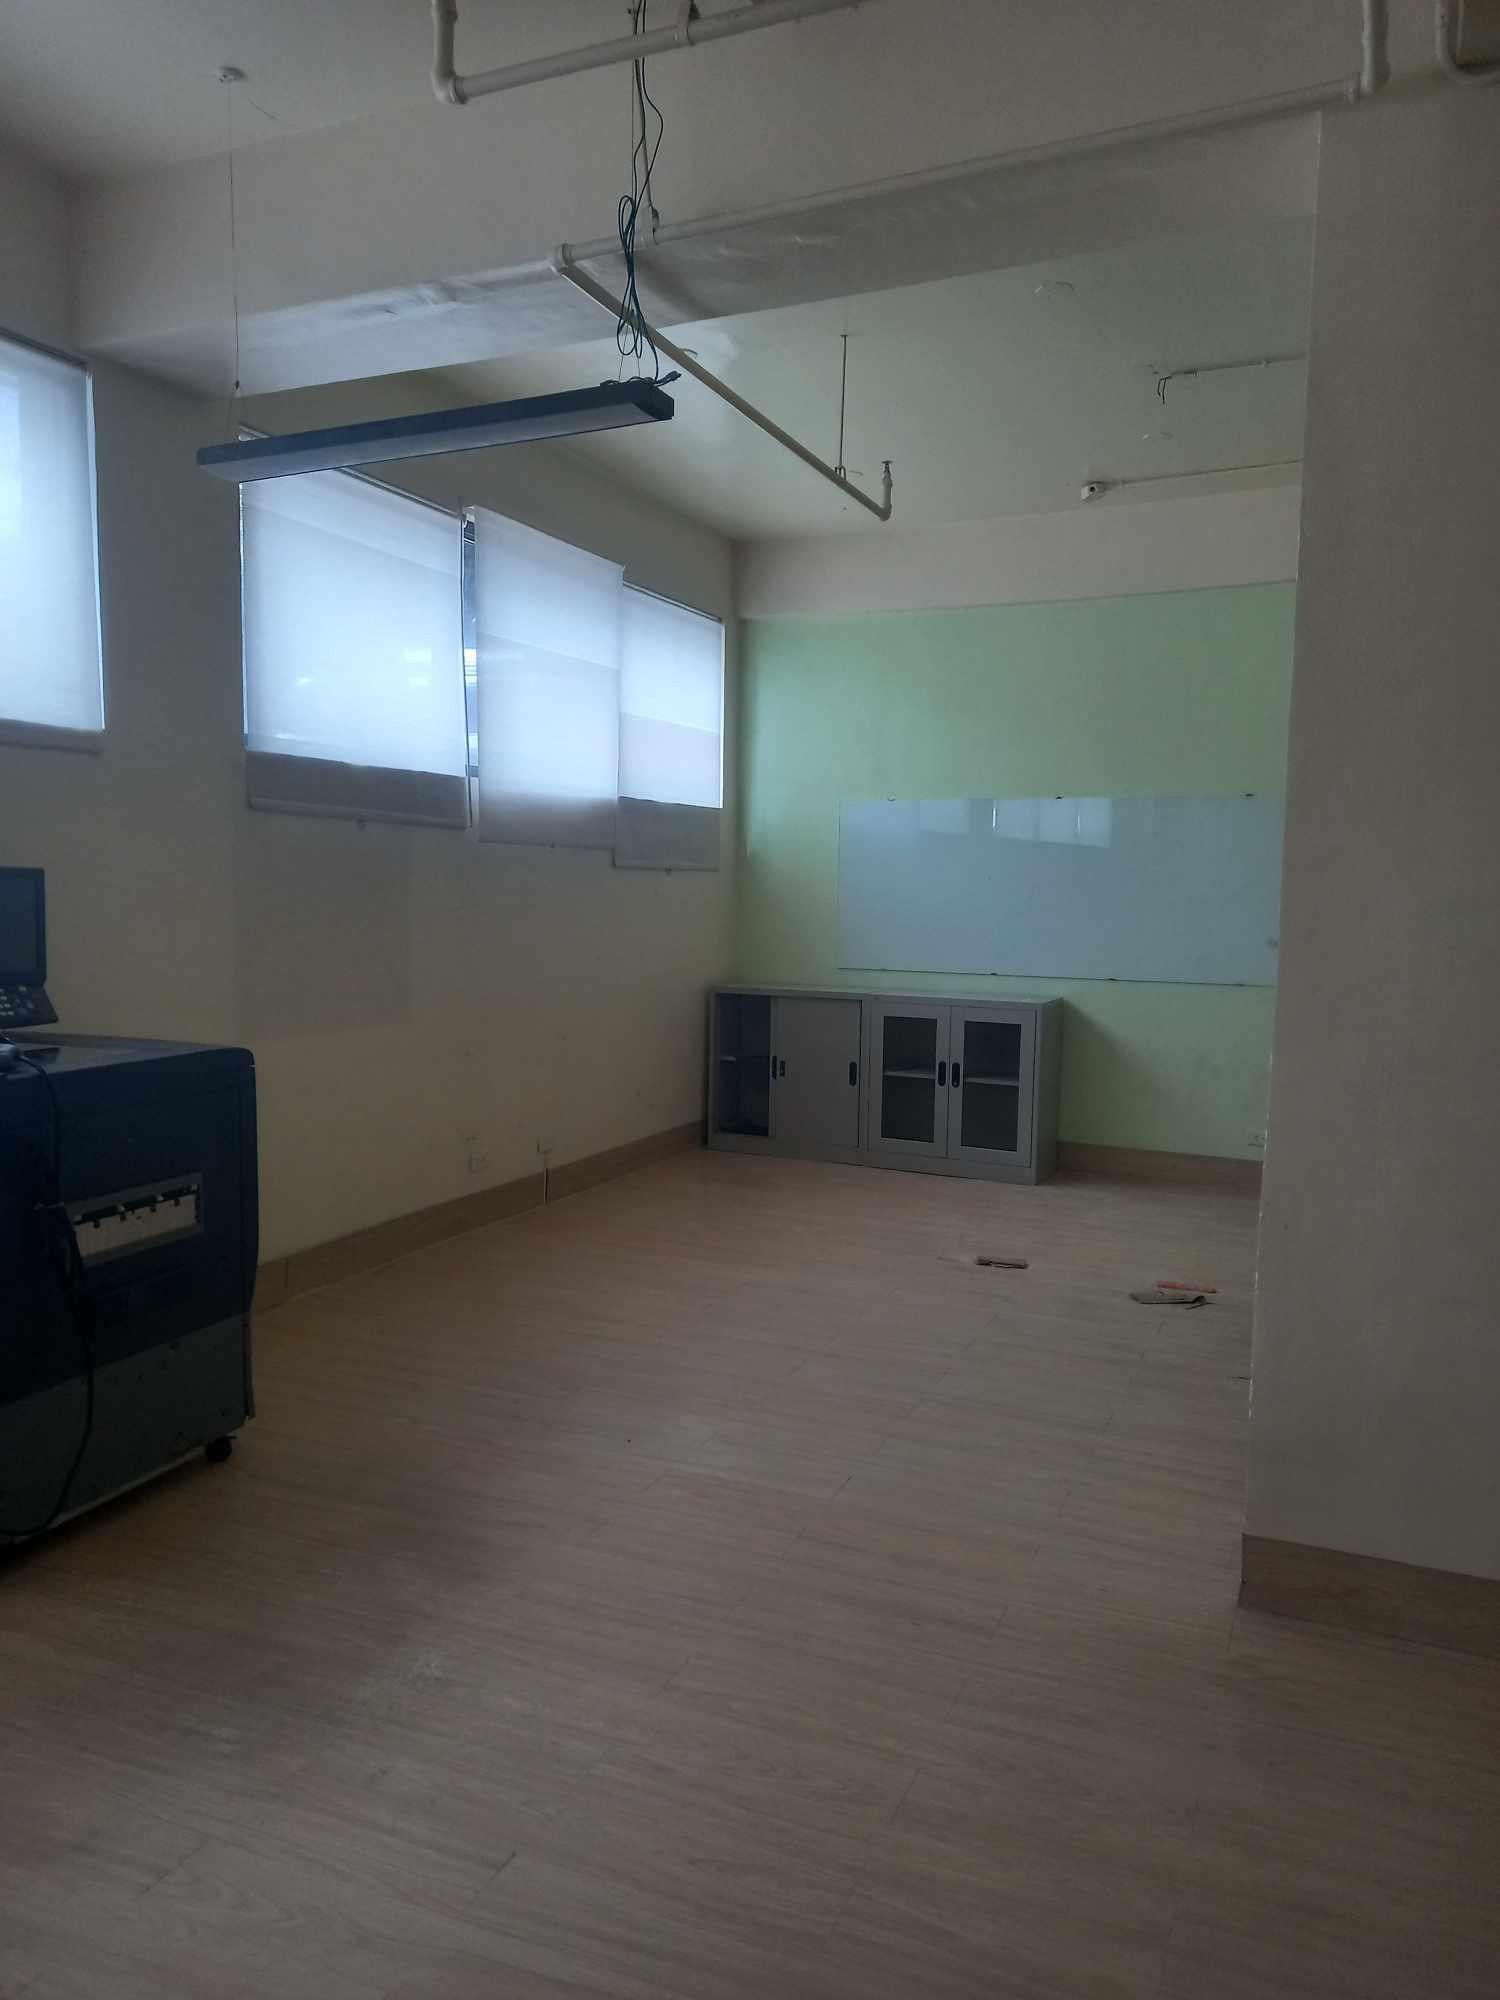 For Rent Lease Office Space Mandaluyong City Manila 70 sqm